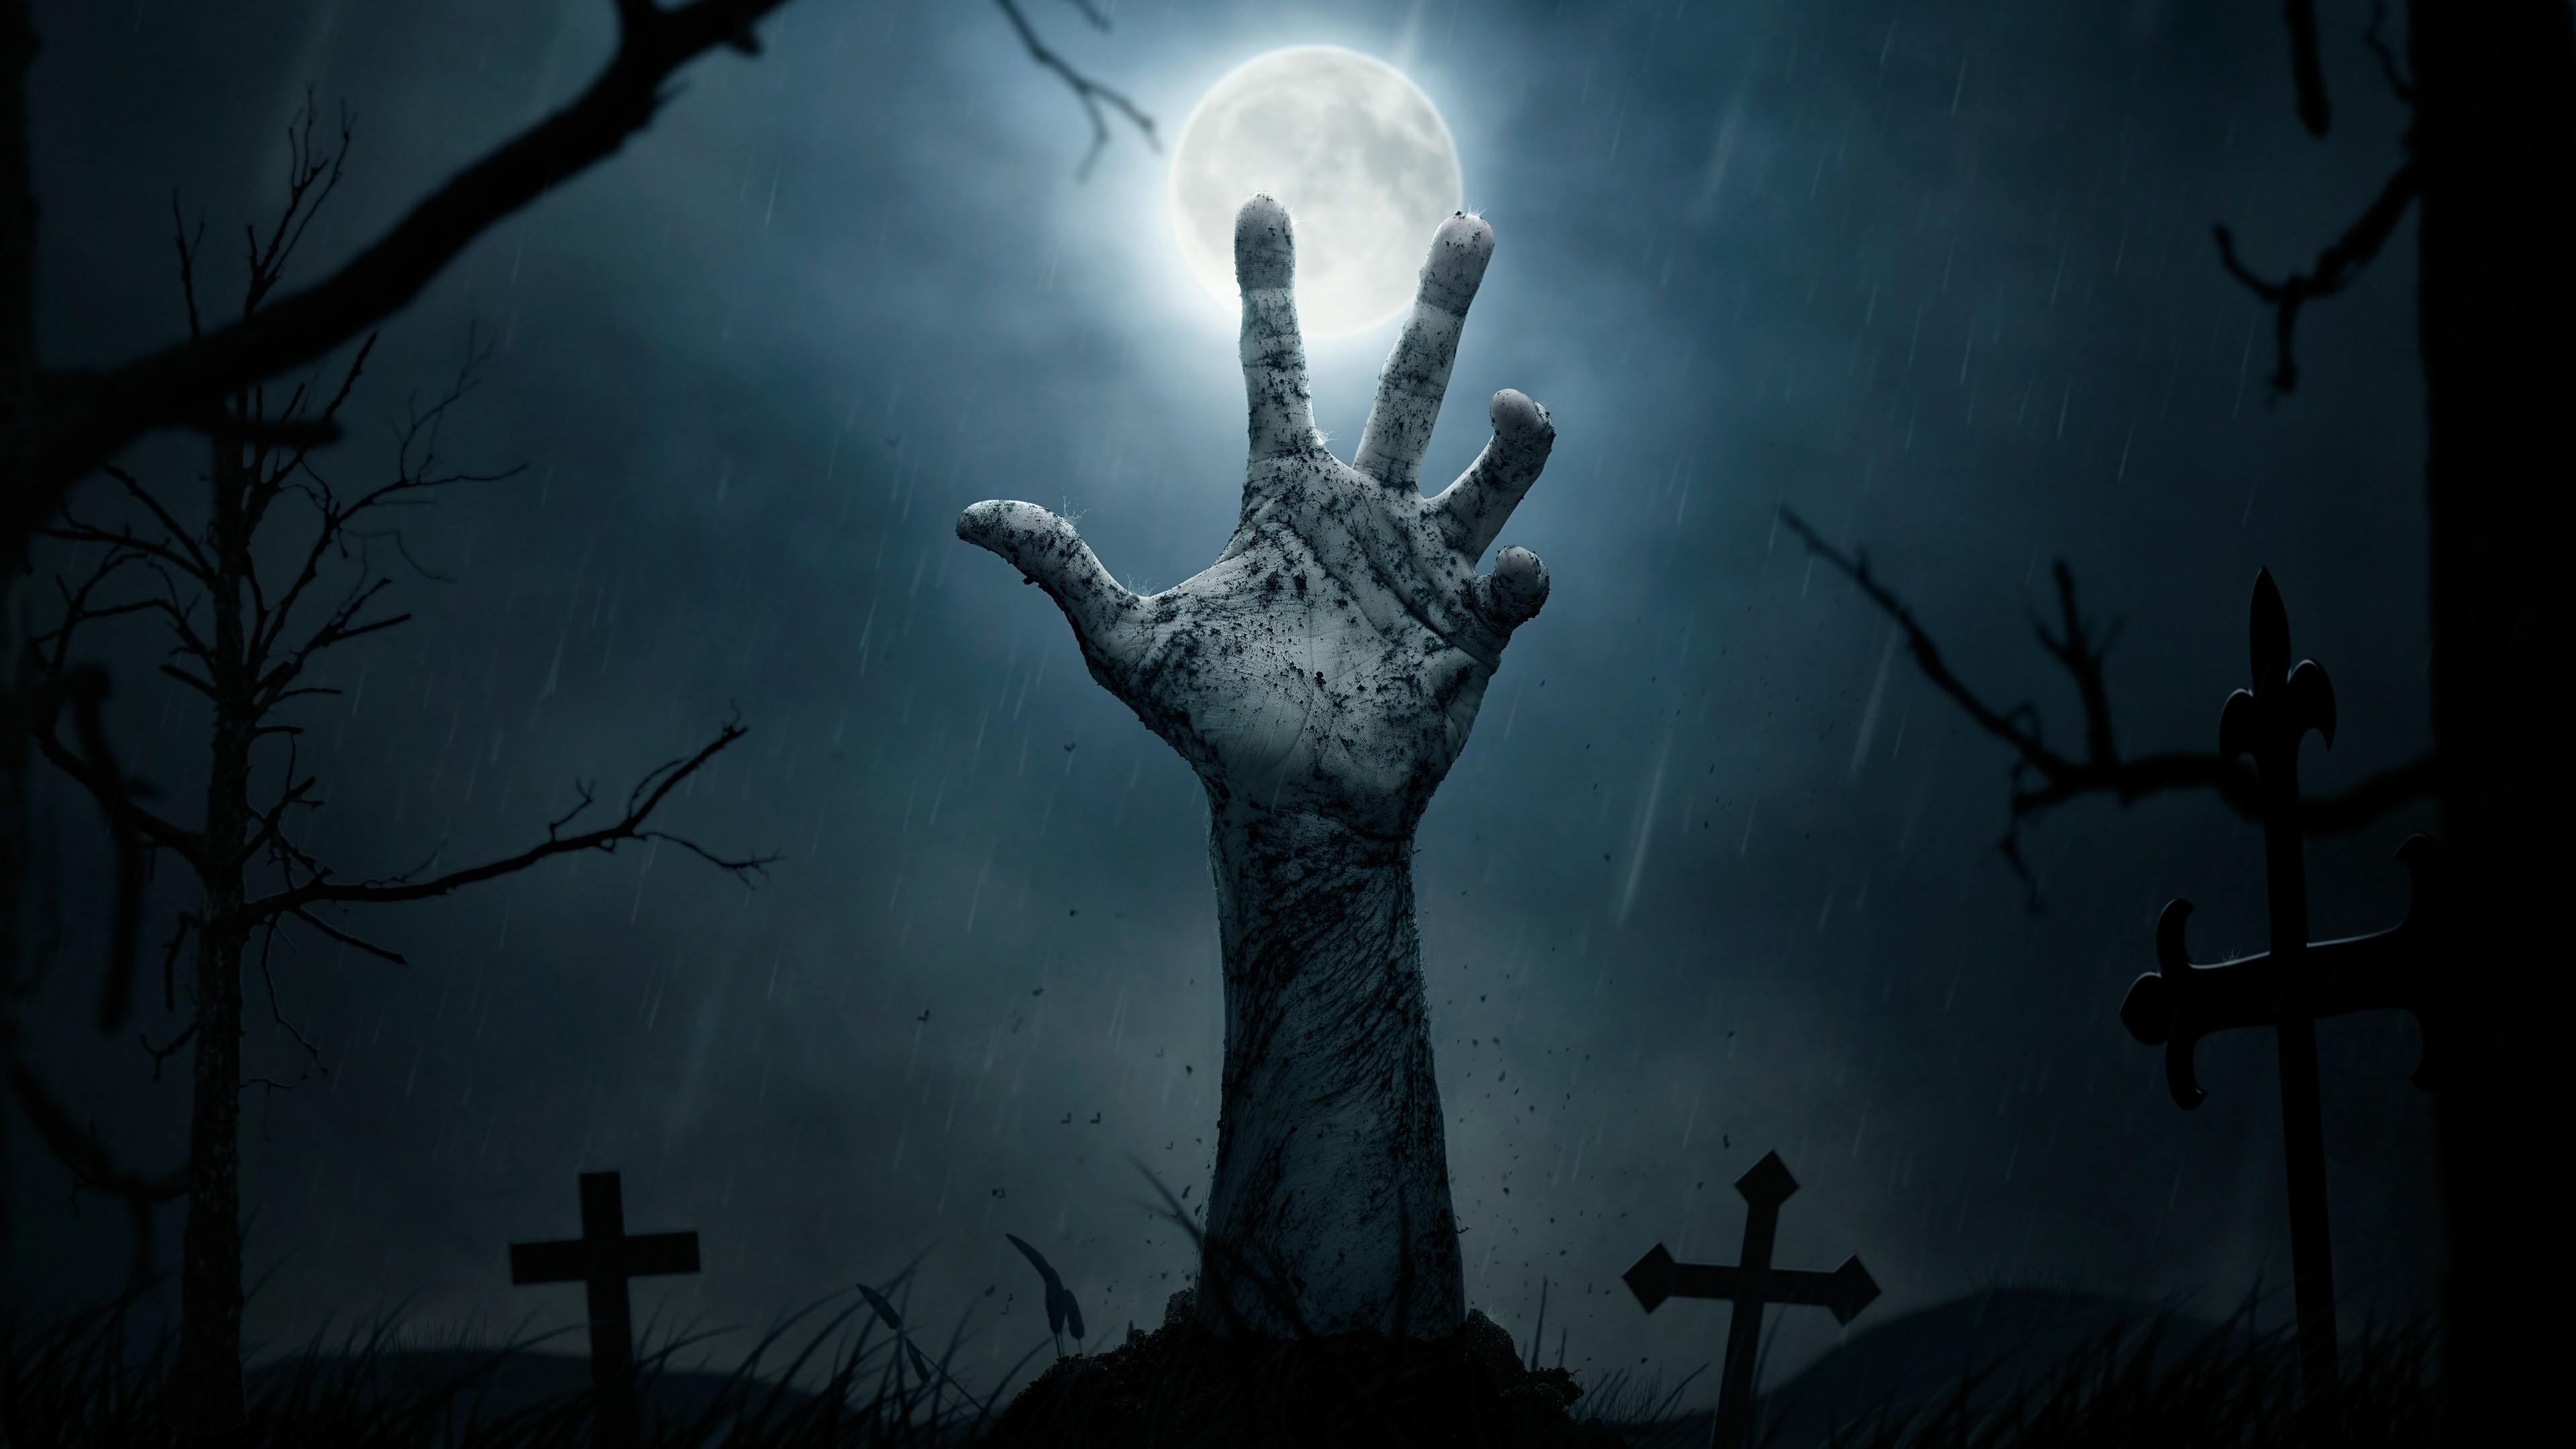 Graveyard At Night Spooky Cemetery With Moon In Cloudy Sky And Bats Stock  Photo - Download Image Now - iStock